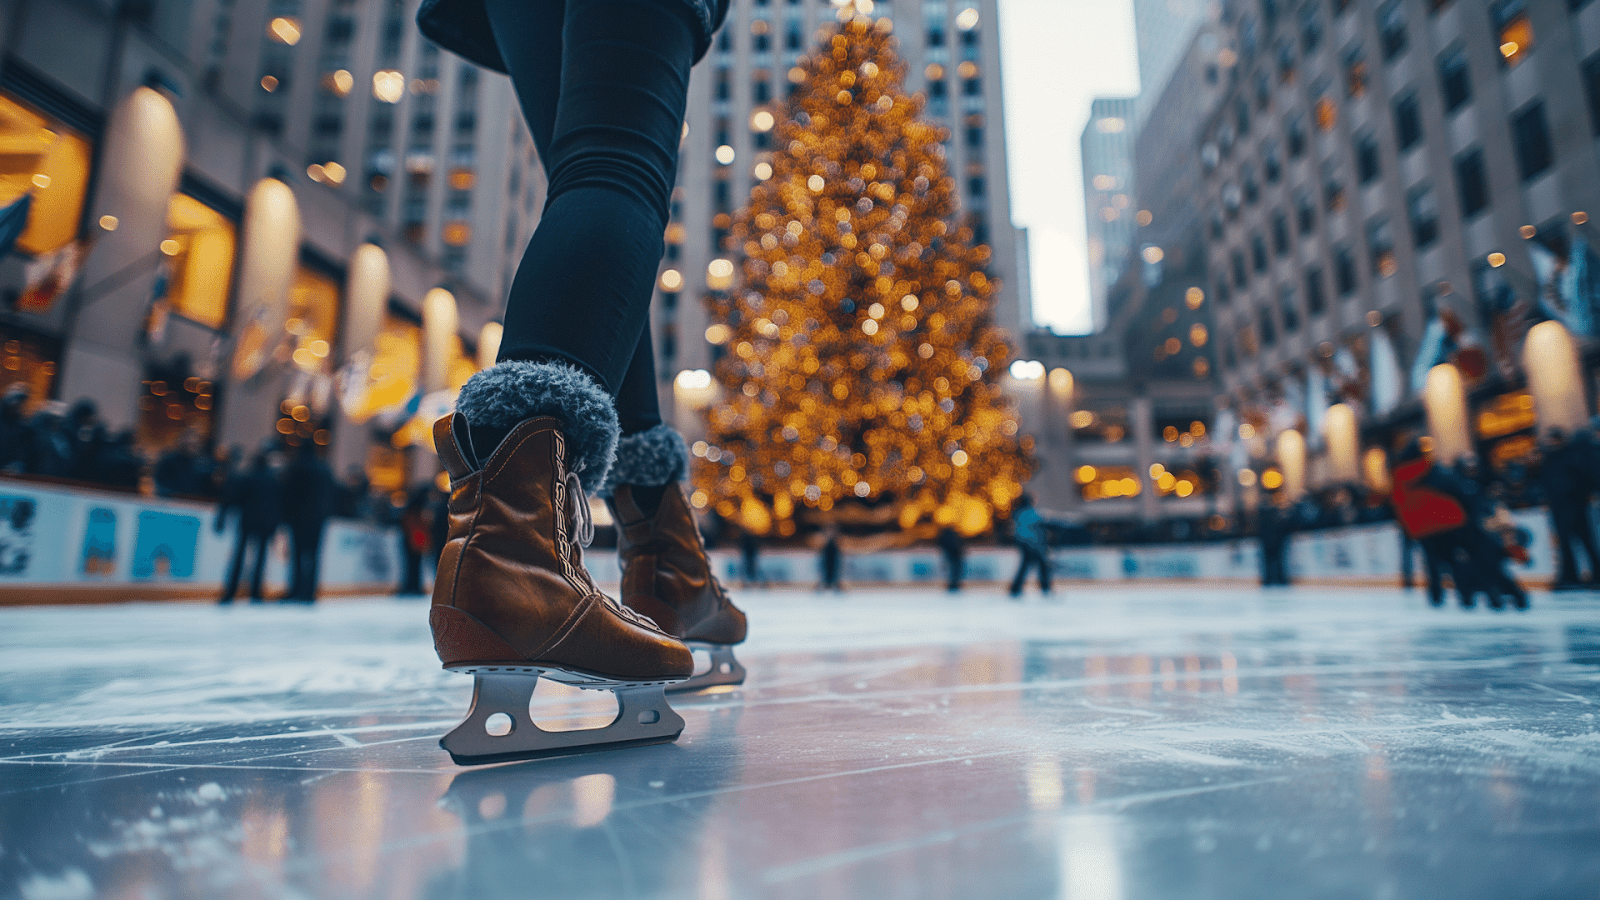 Person ice skating with a brightly lit Christmas tree in a city square behind them